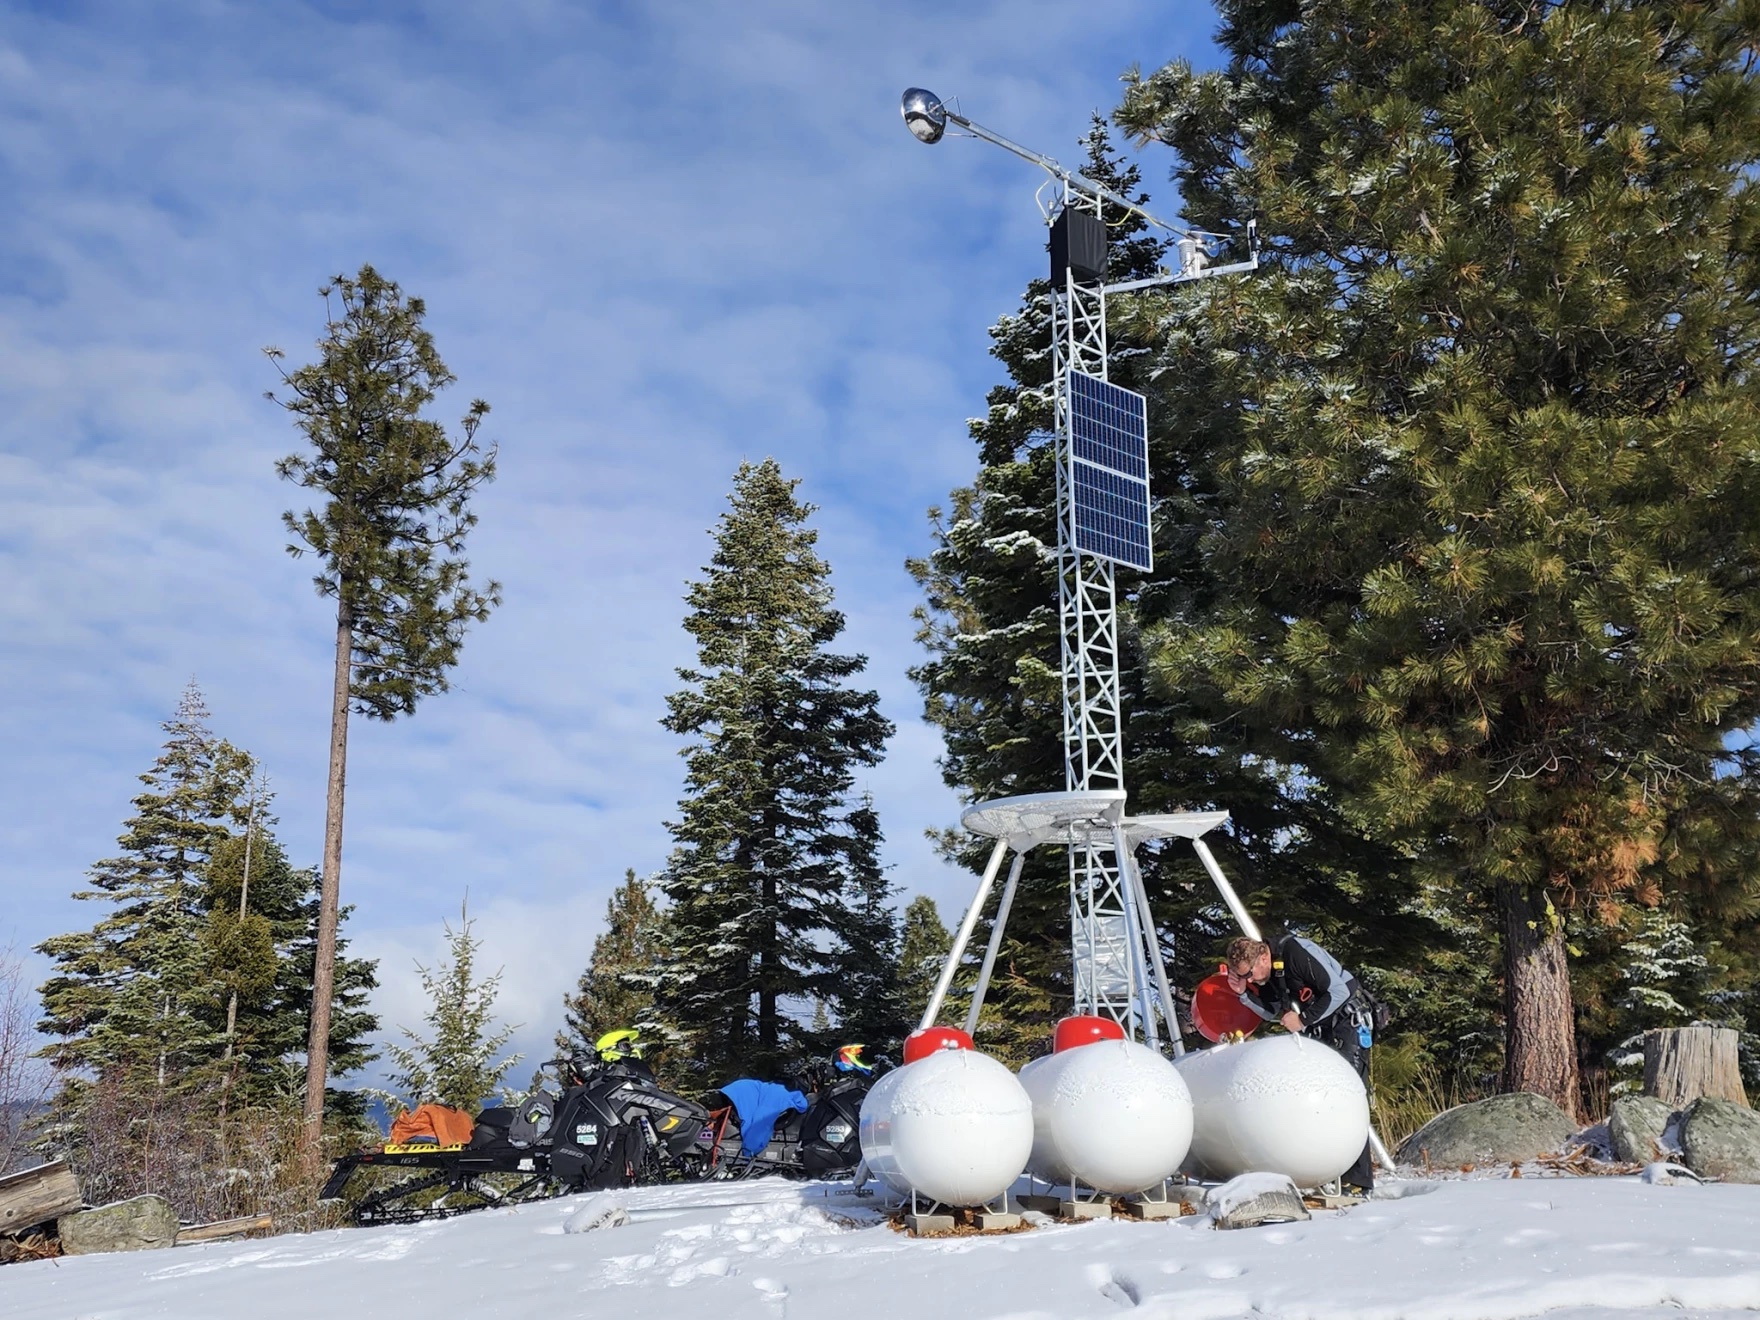 A metal antenna-like object with a solar panel attached to it stands on top of a snowy hill.